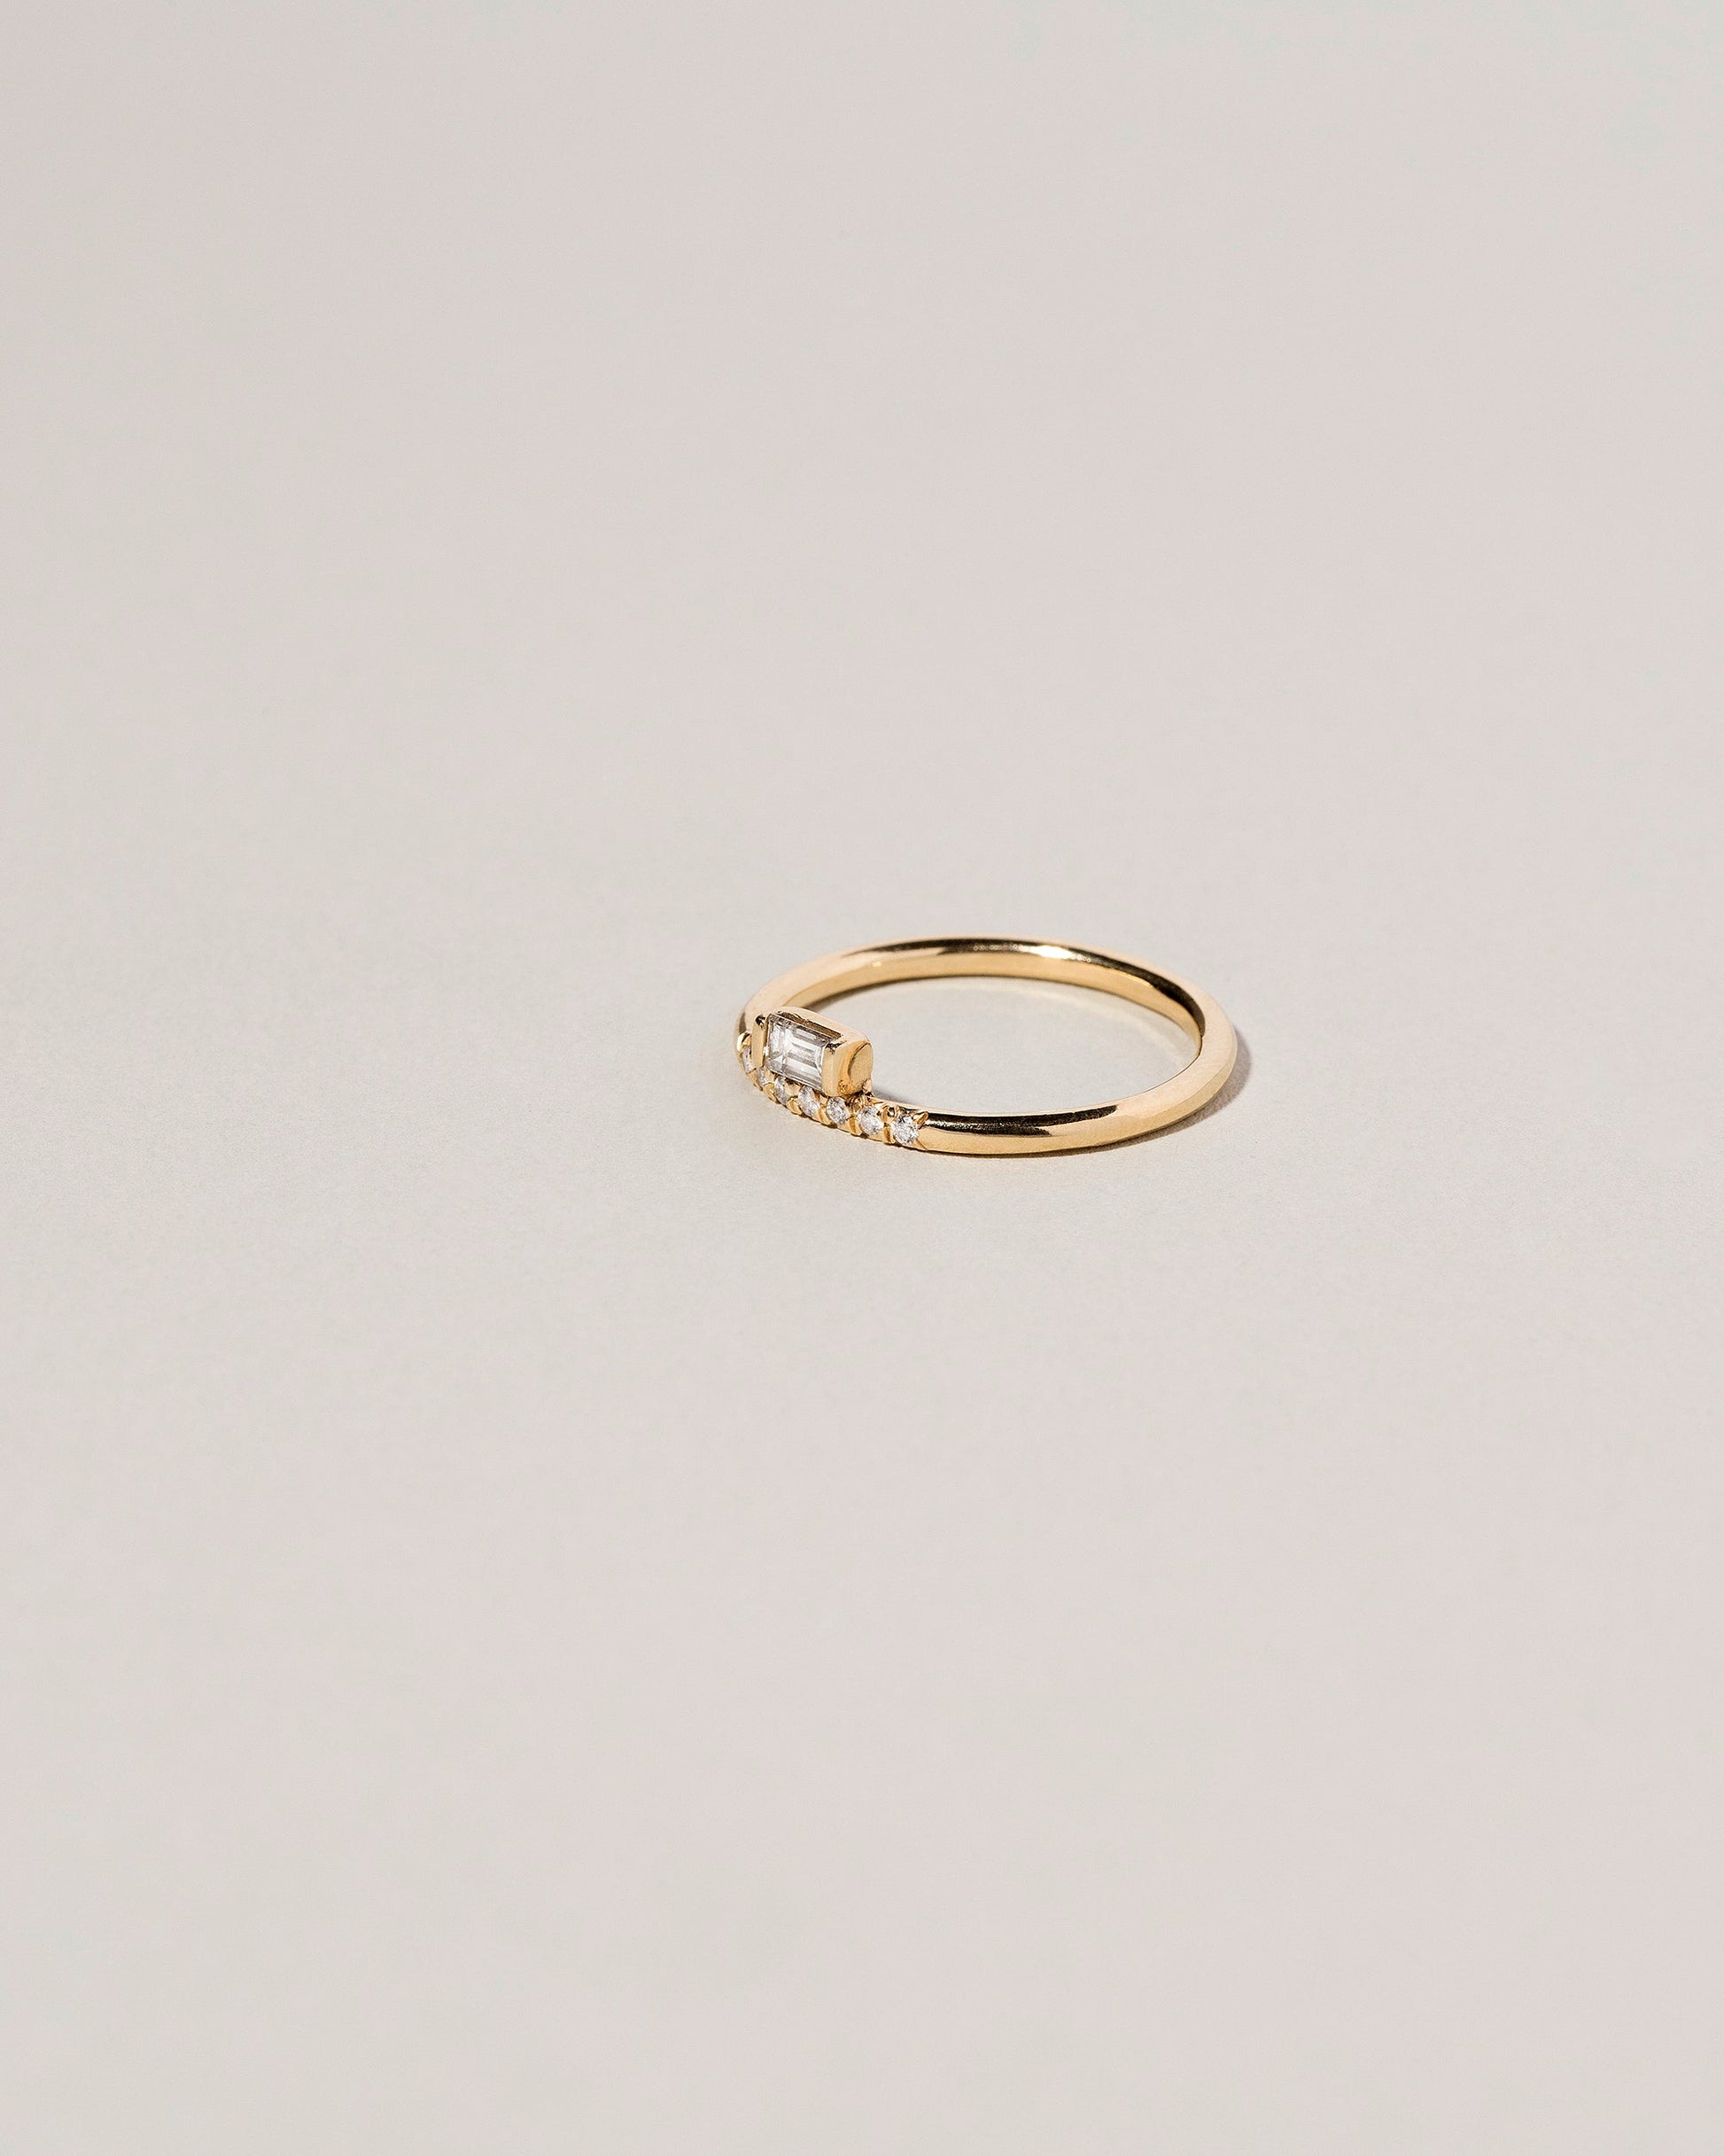  Stacked Ring - Baguette on light color background.